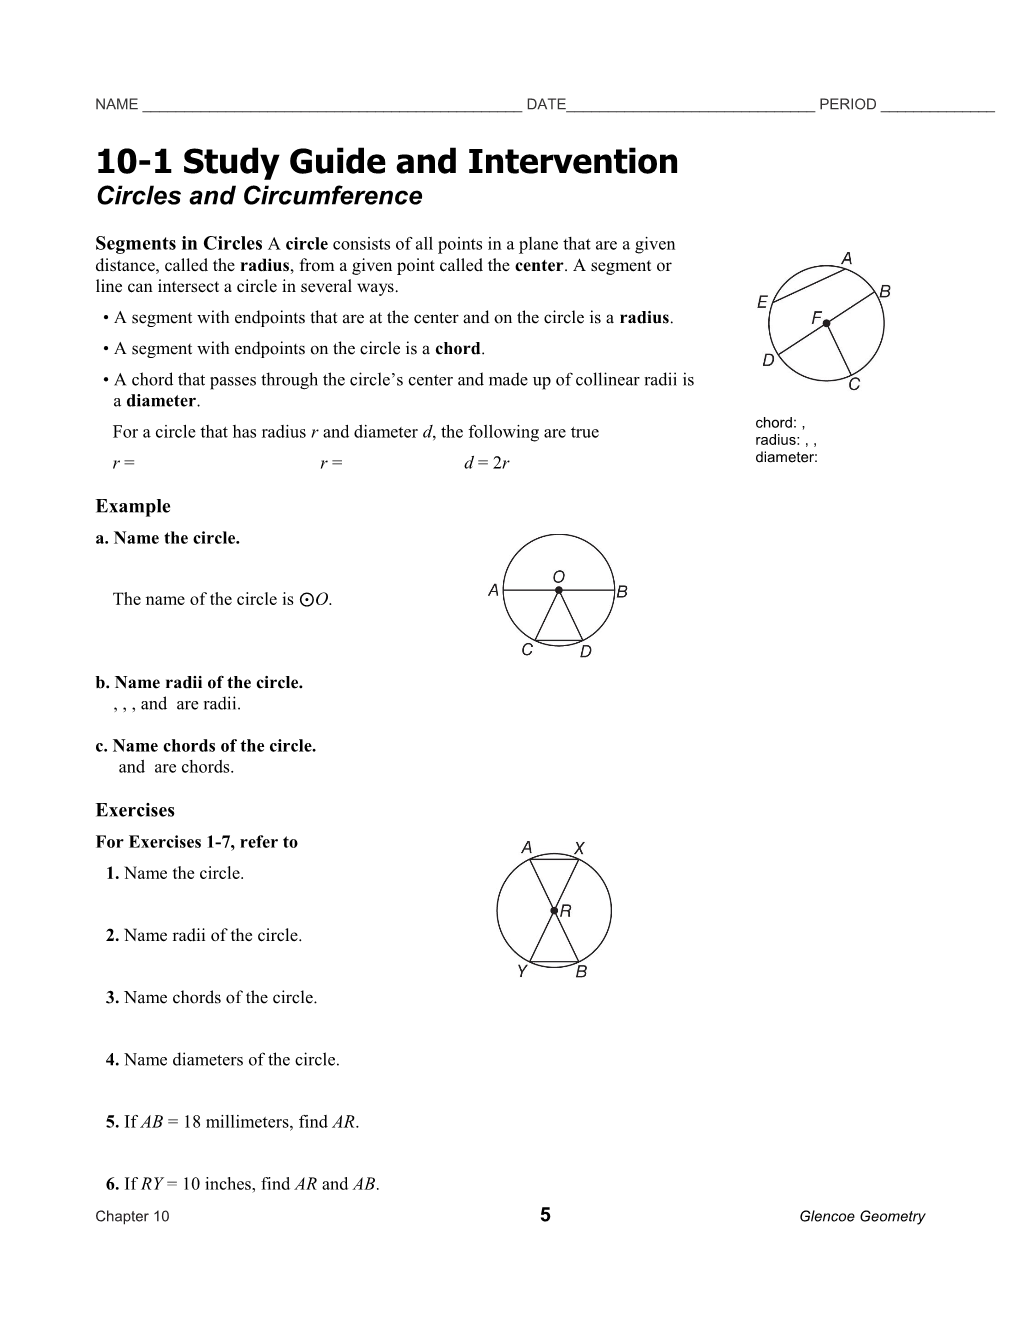 10-1 Study Guide and Intervention